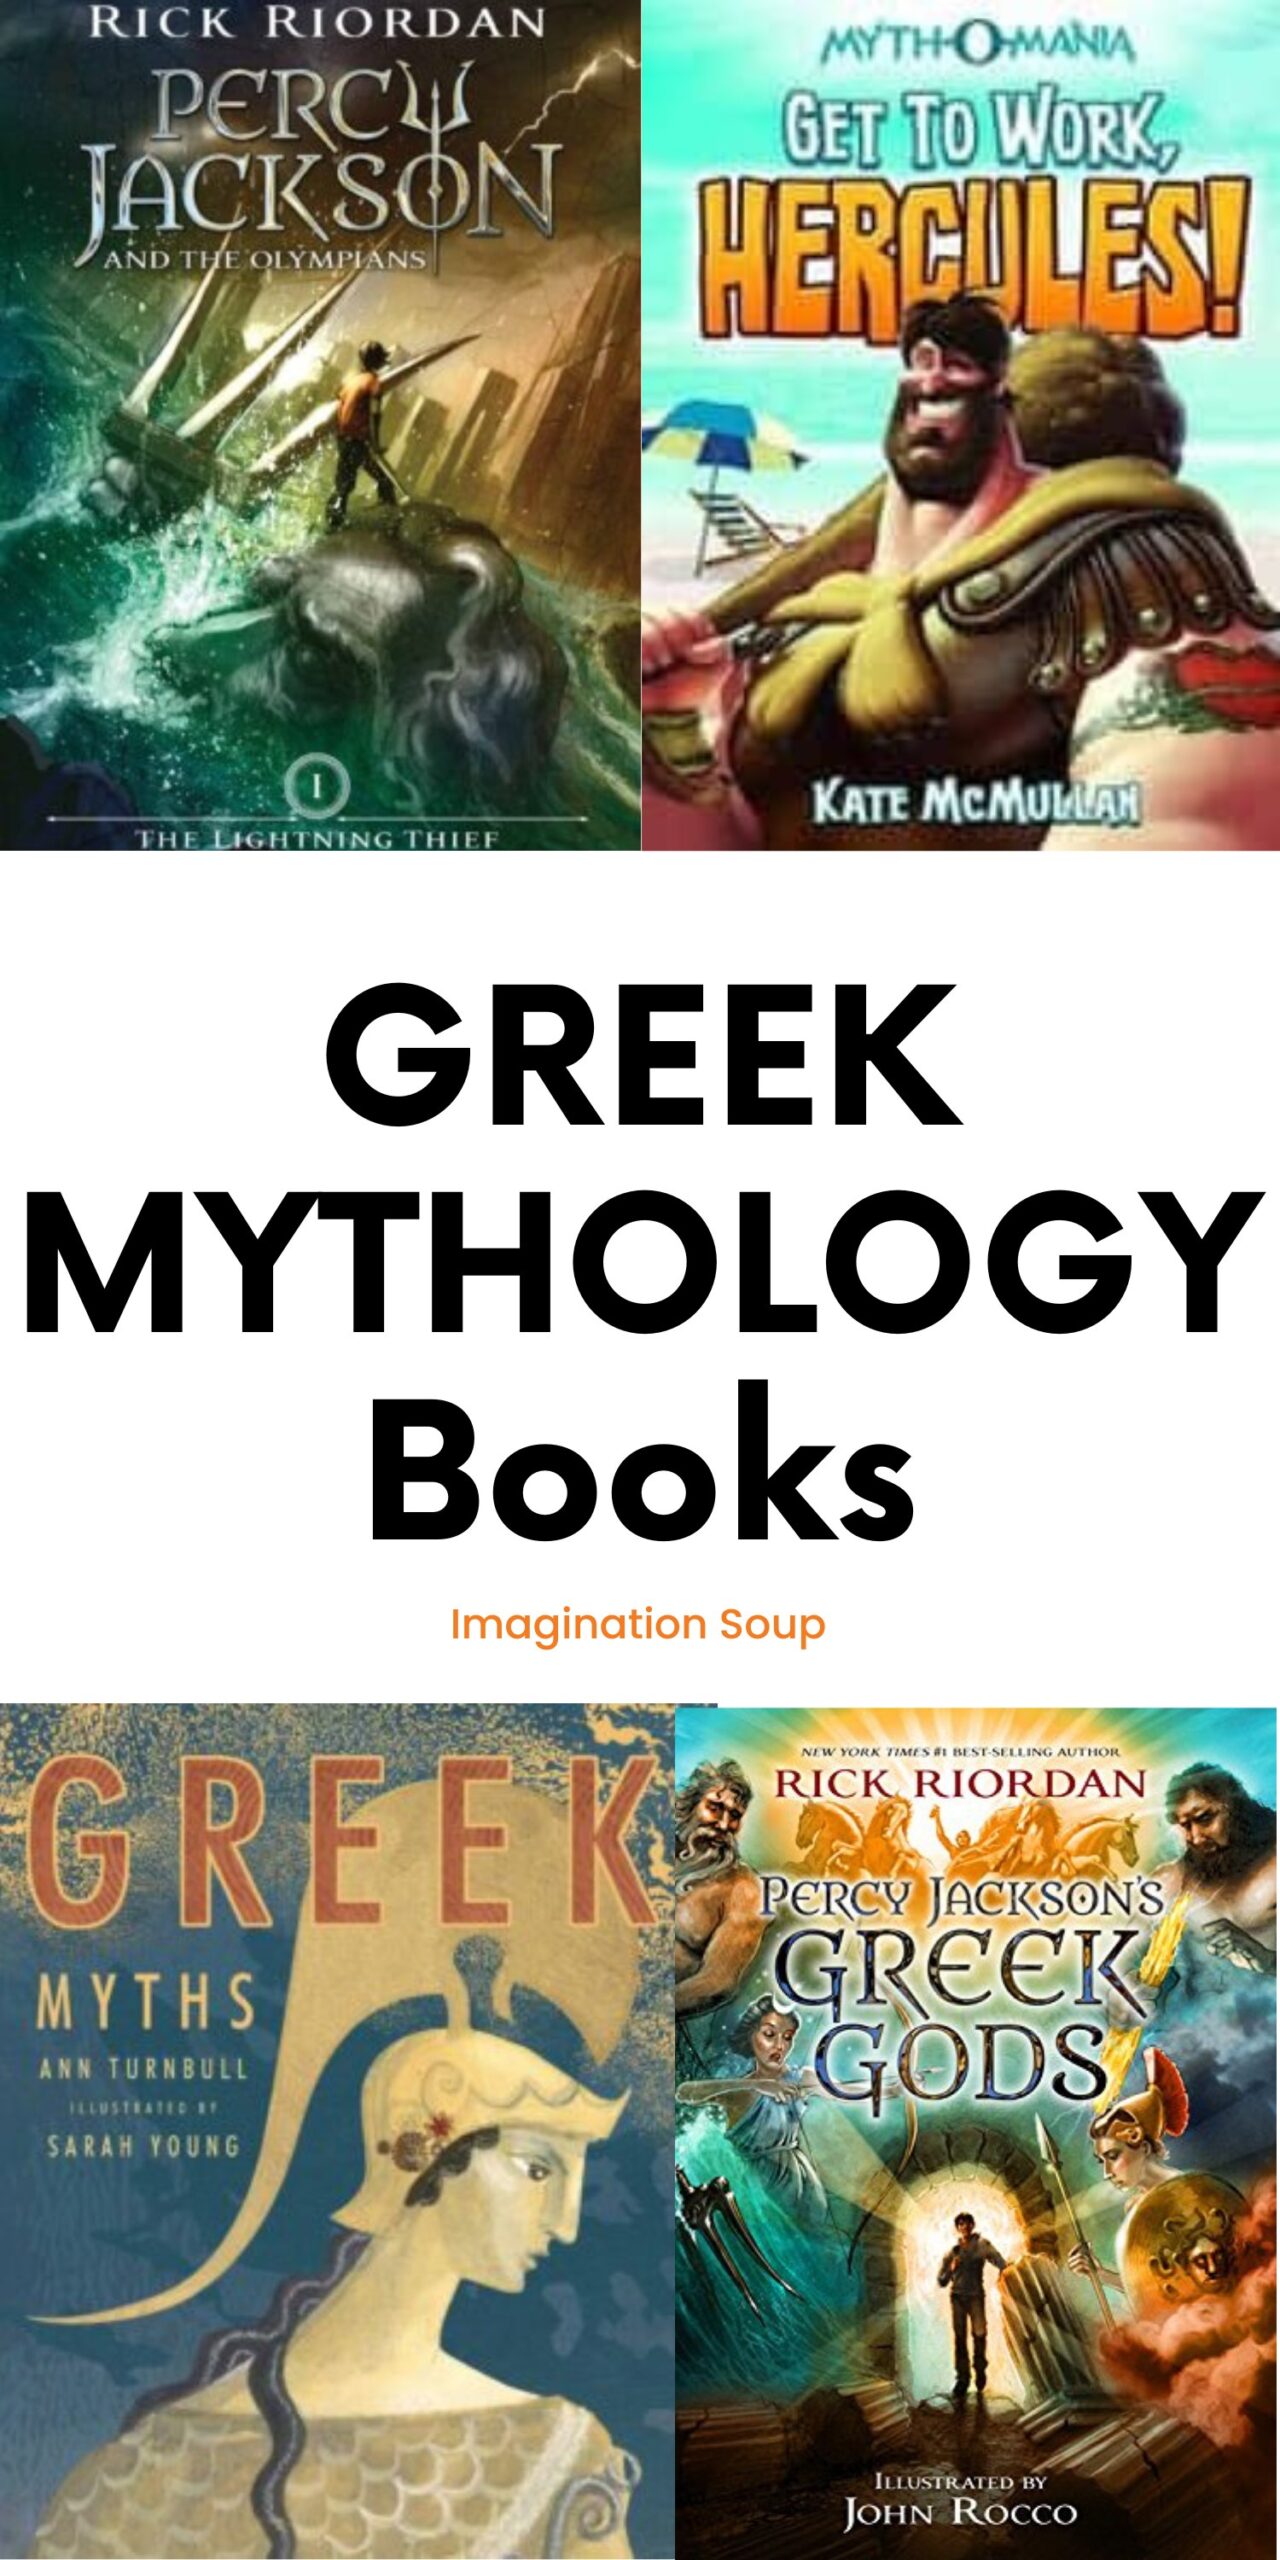 Kids love Greek mythology-- and what's not to love? They're action-packed, drama-filled, funny, and adventurous stories, albeit occasionally inappropriate stories of gods and monsters from the religion of ancient Greek civilization.